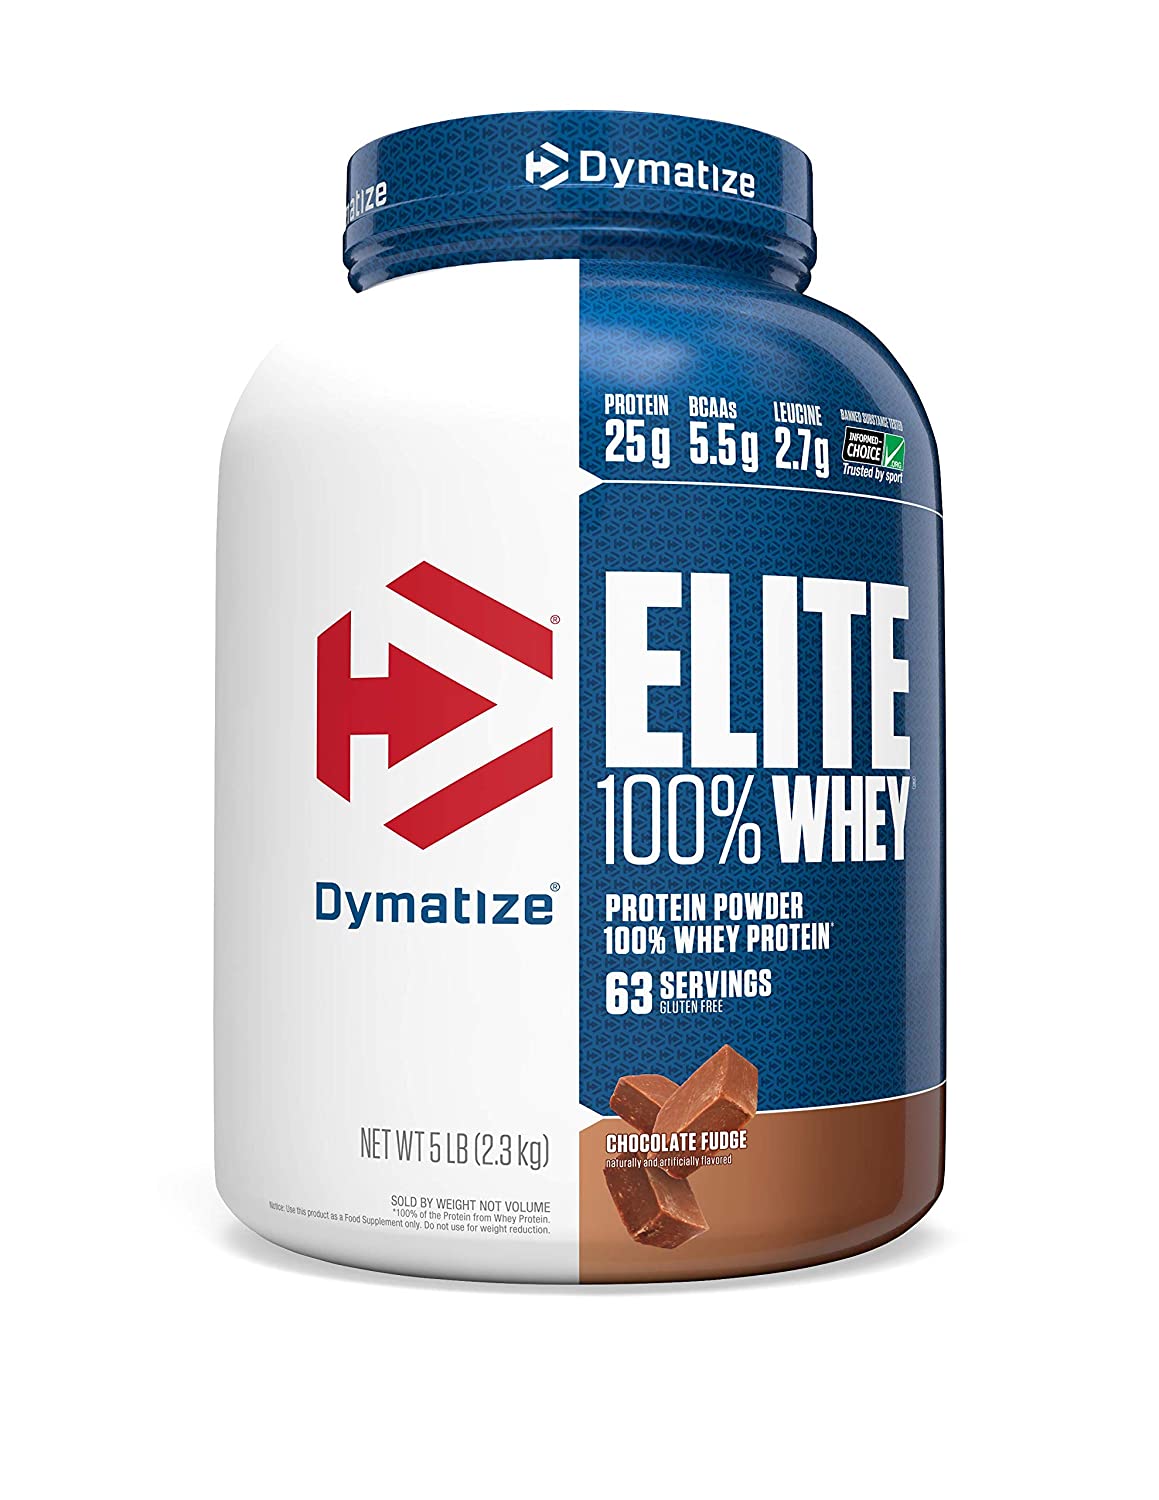 Image Of Dymatize Elite 100% Whey Protein Beast Nutrition